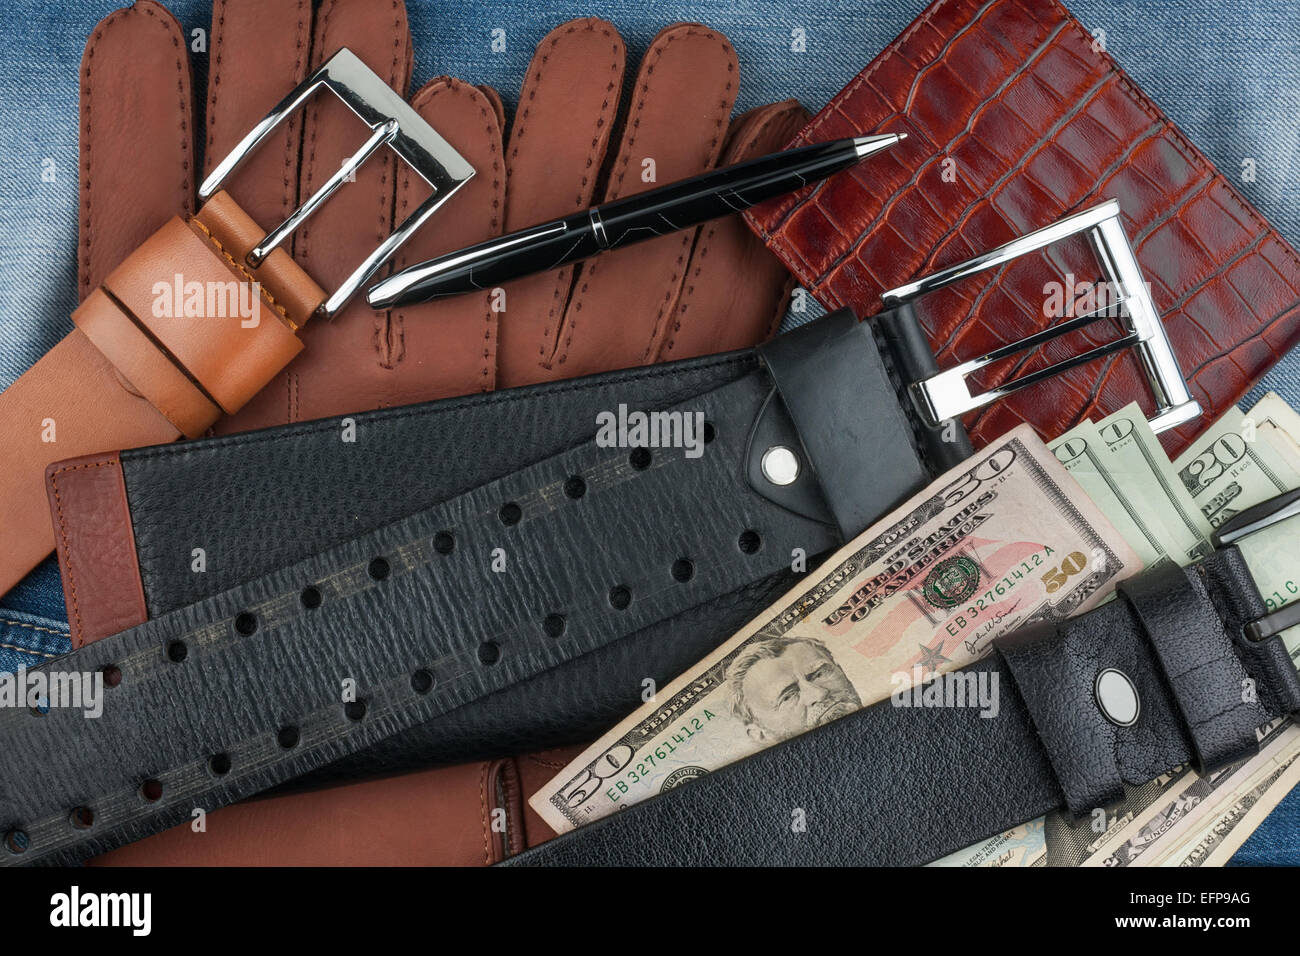 Pen, gloves, purses, belts and money on jeans background Stock Photo